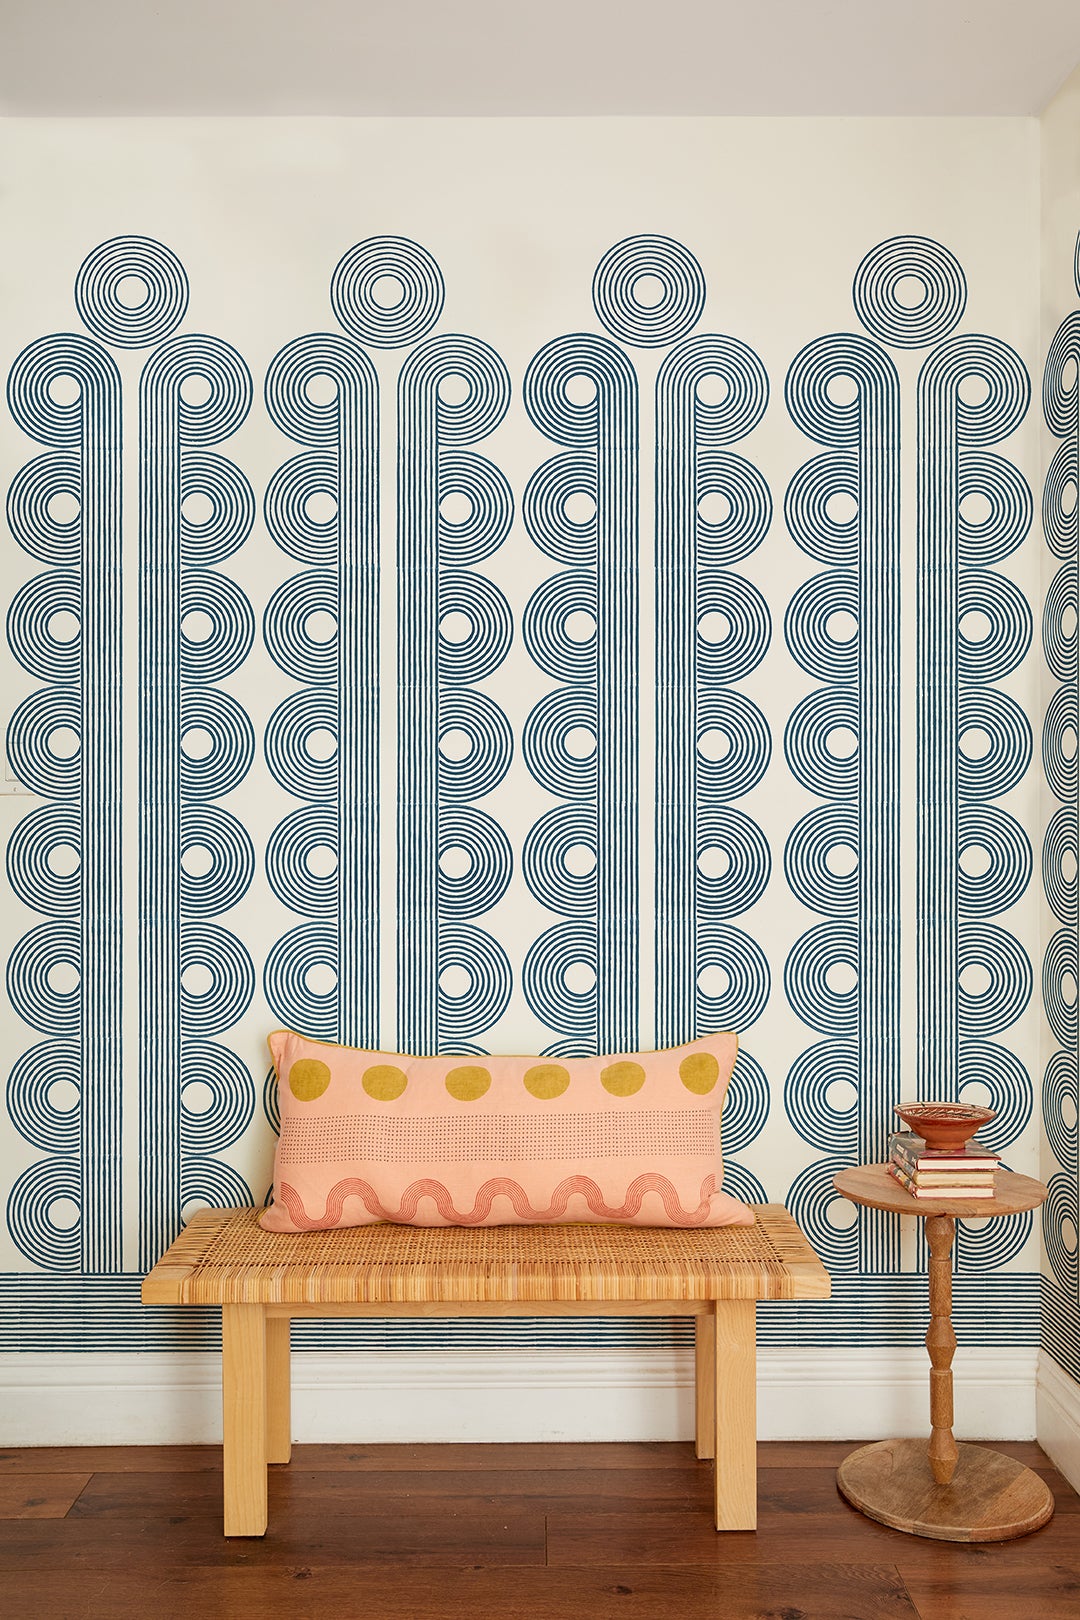 The Best New Wallpaper Pattern Doesn’t Even Fill an Entire Wall